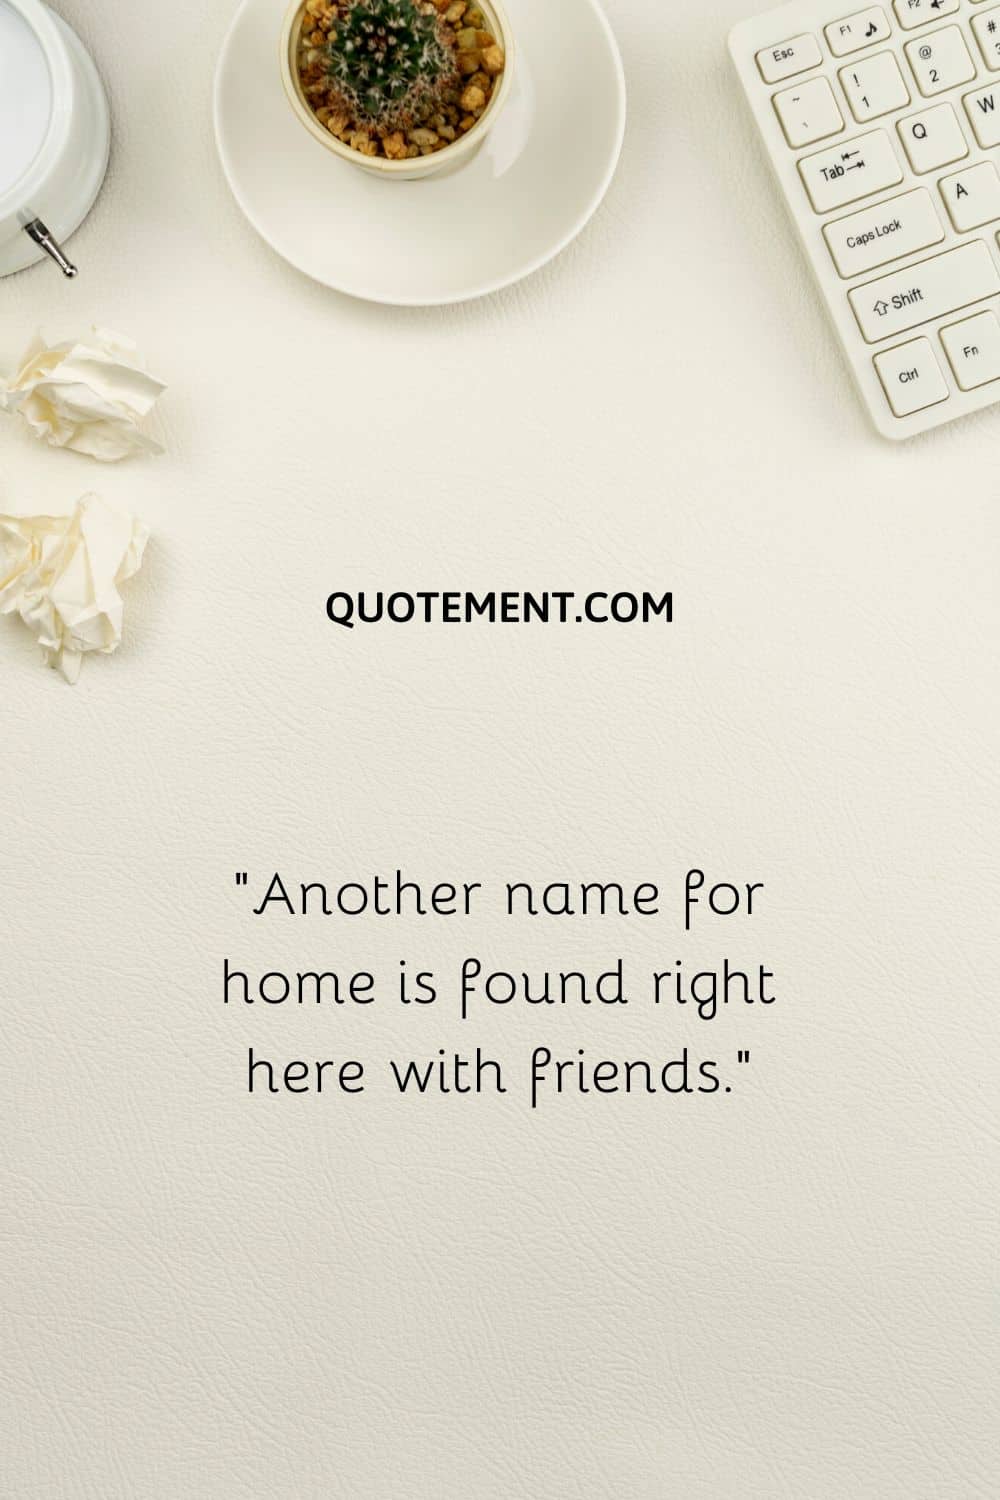 “Another name for home is found right here with friends.”